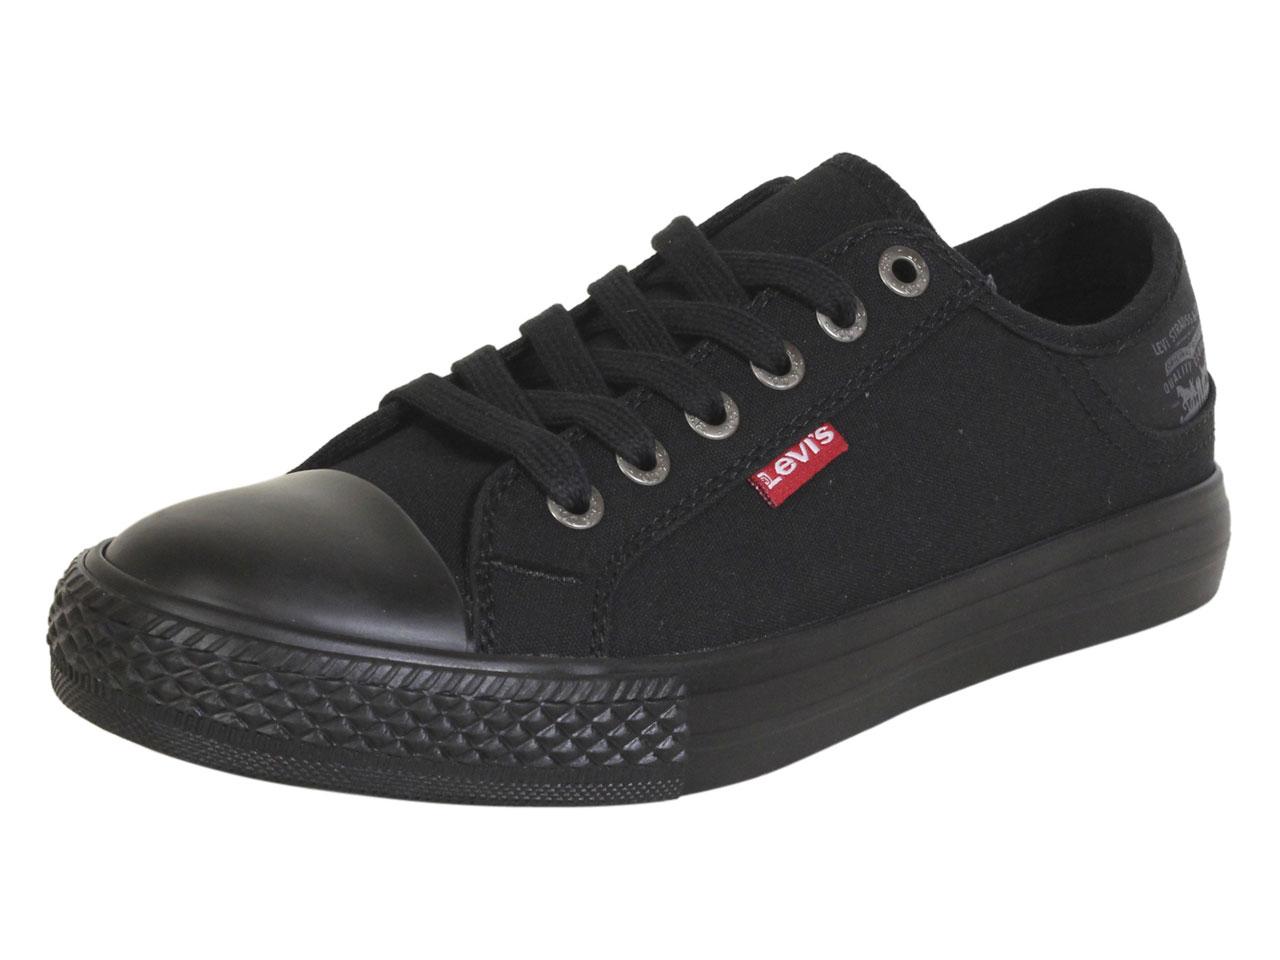 Buy sneakers for women online | Levi's India – Levis India Store-tuongthan.vn